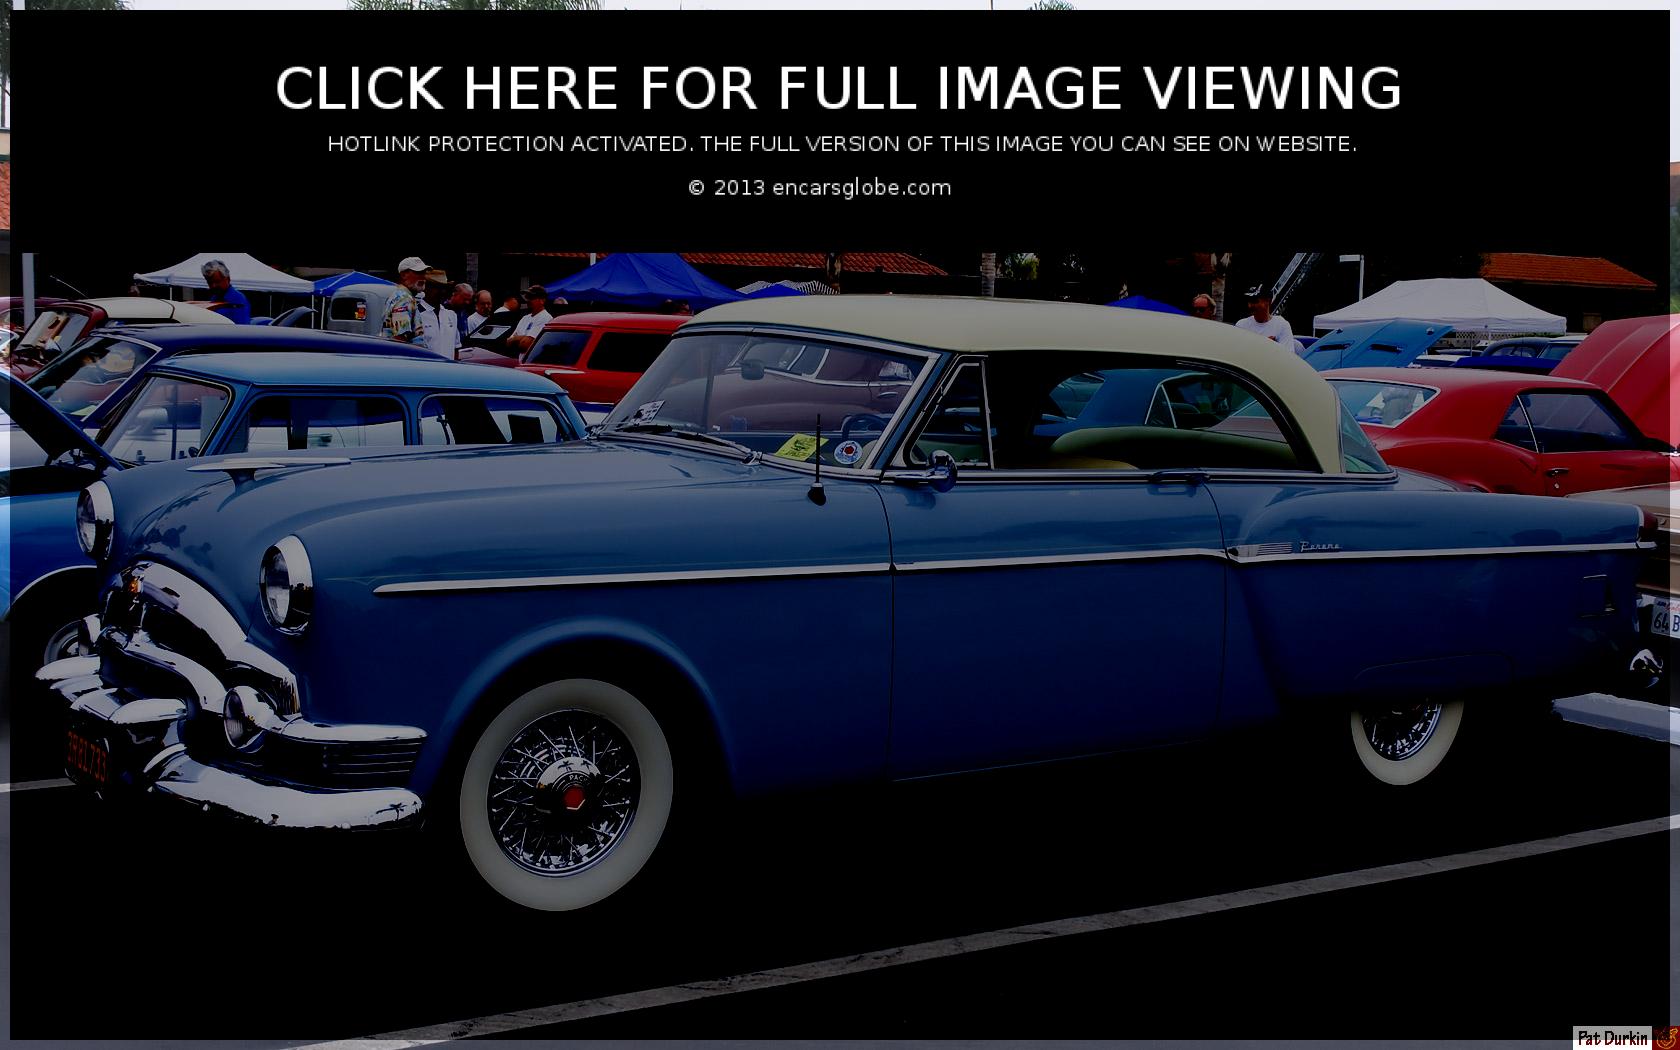 Packard Clipper Super Panama Photo Gallery: Photo #10 out of 12 ...